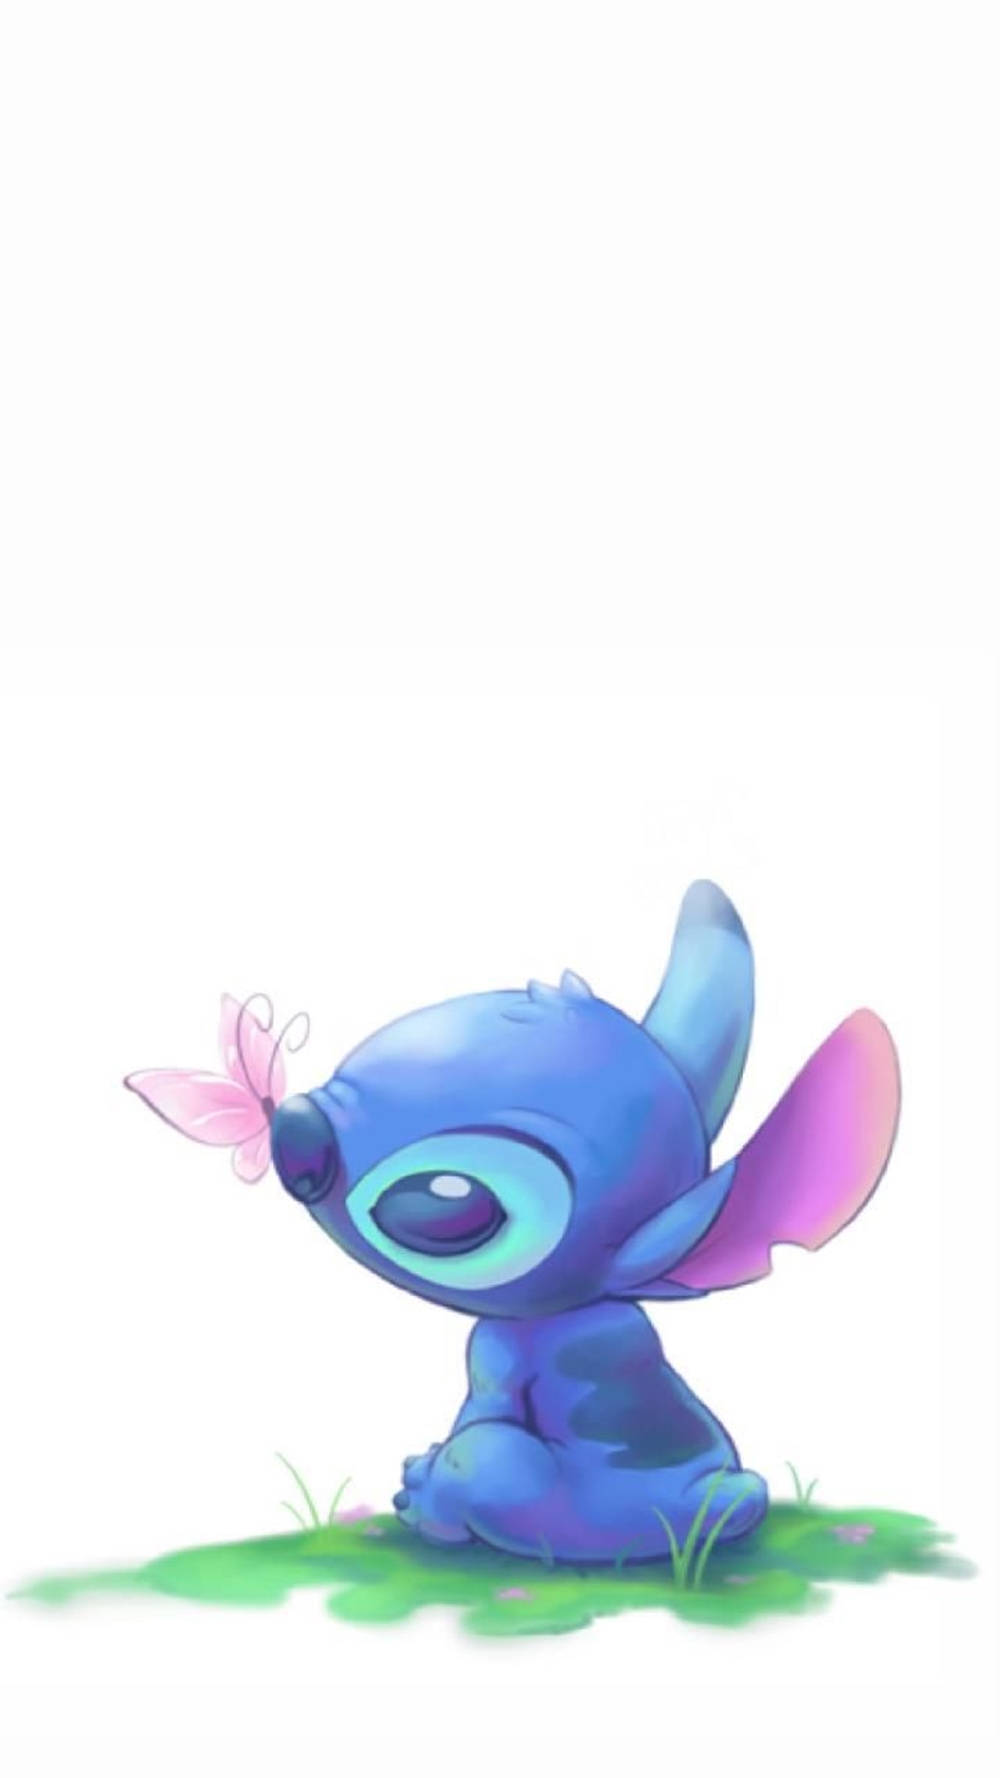 Cute Stitch Butterfly Sunlight Iphone Background